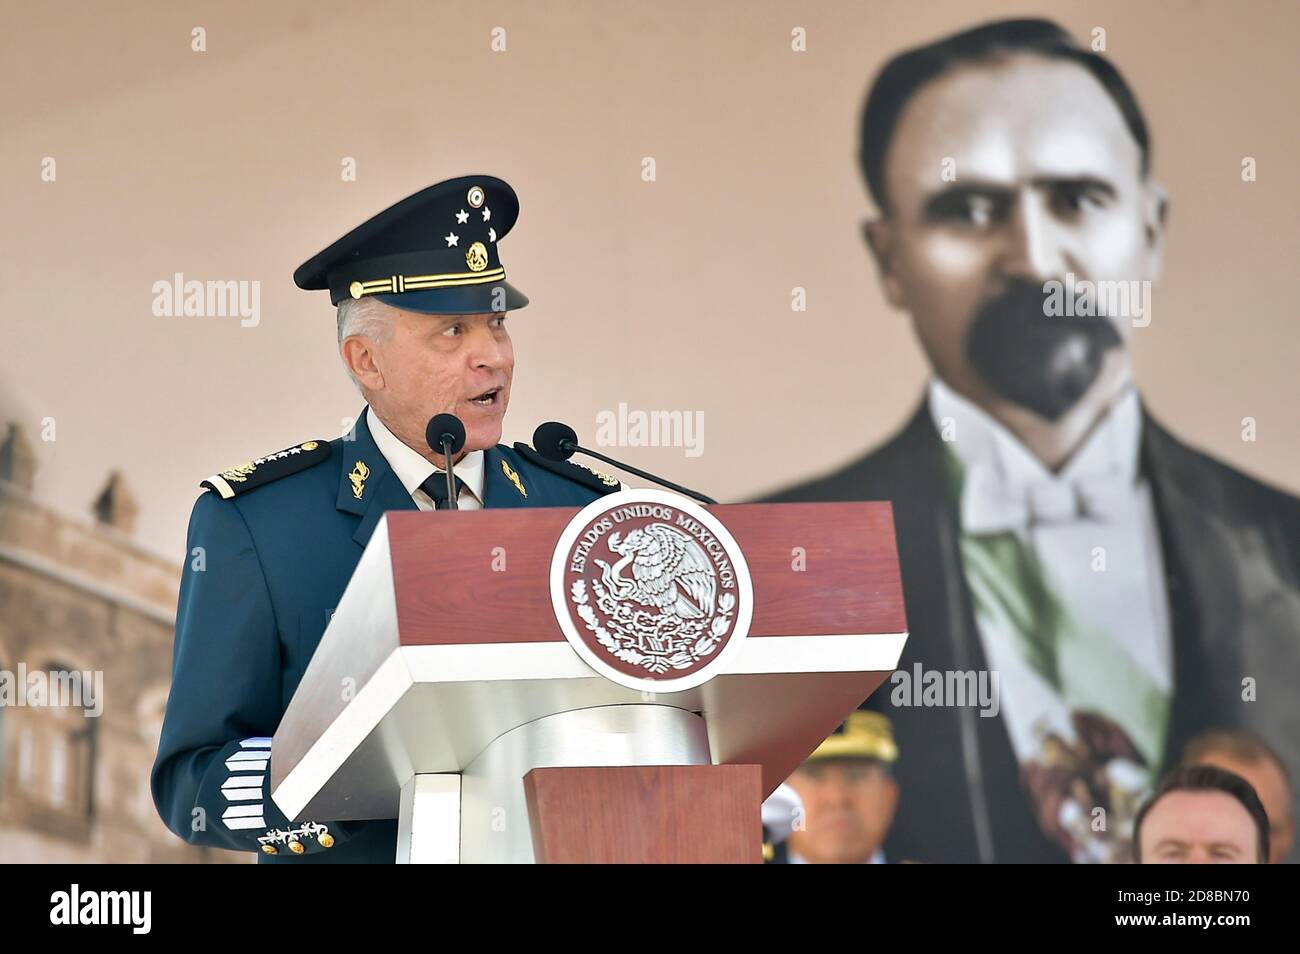 Mexican Defense Minister Gen. Salvador Cienfuegos Zepeda delivers remarks during a ceremony honoring the 104th Anniversary of the Loyalty March February 9, 2017 in Mexico City, Mexico. Cienfuegos was arrested October 16, 2020 at Los Angeles International Airport and charged with drug-related corruption. Stock Photo